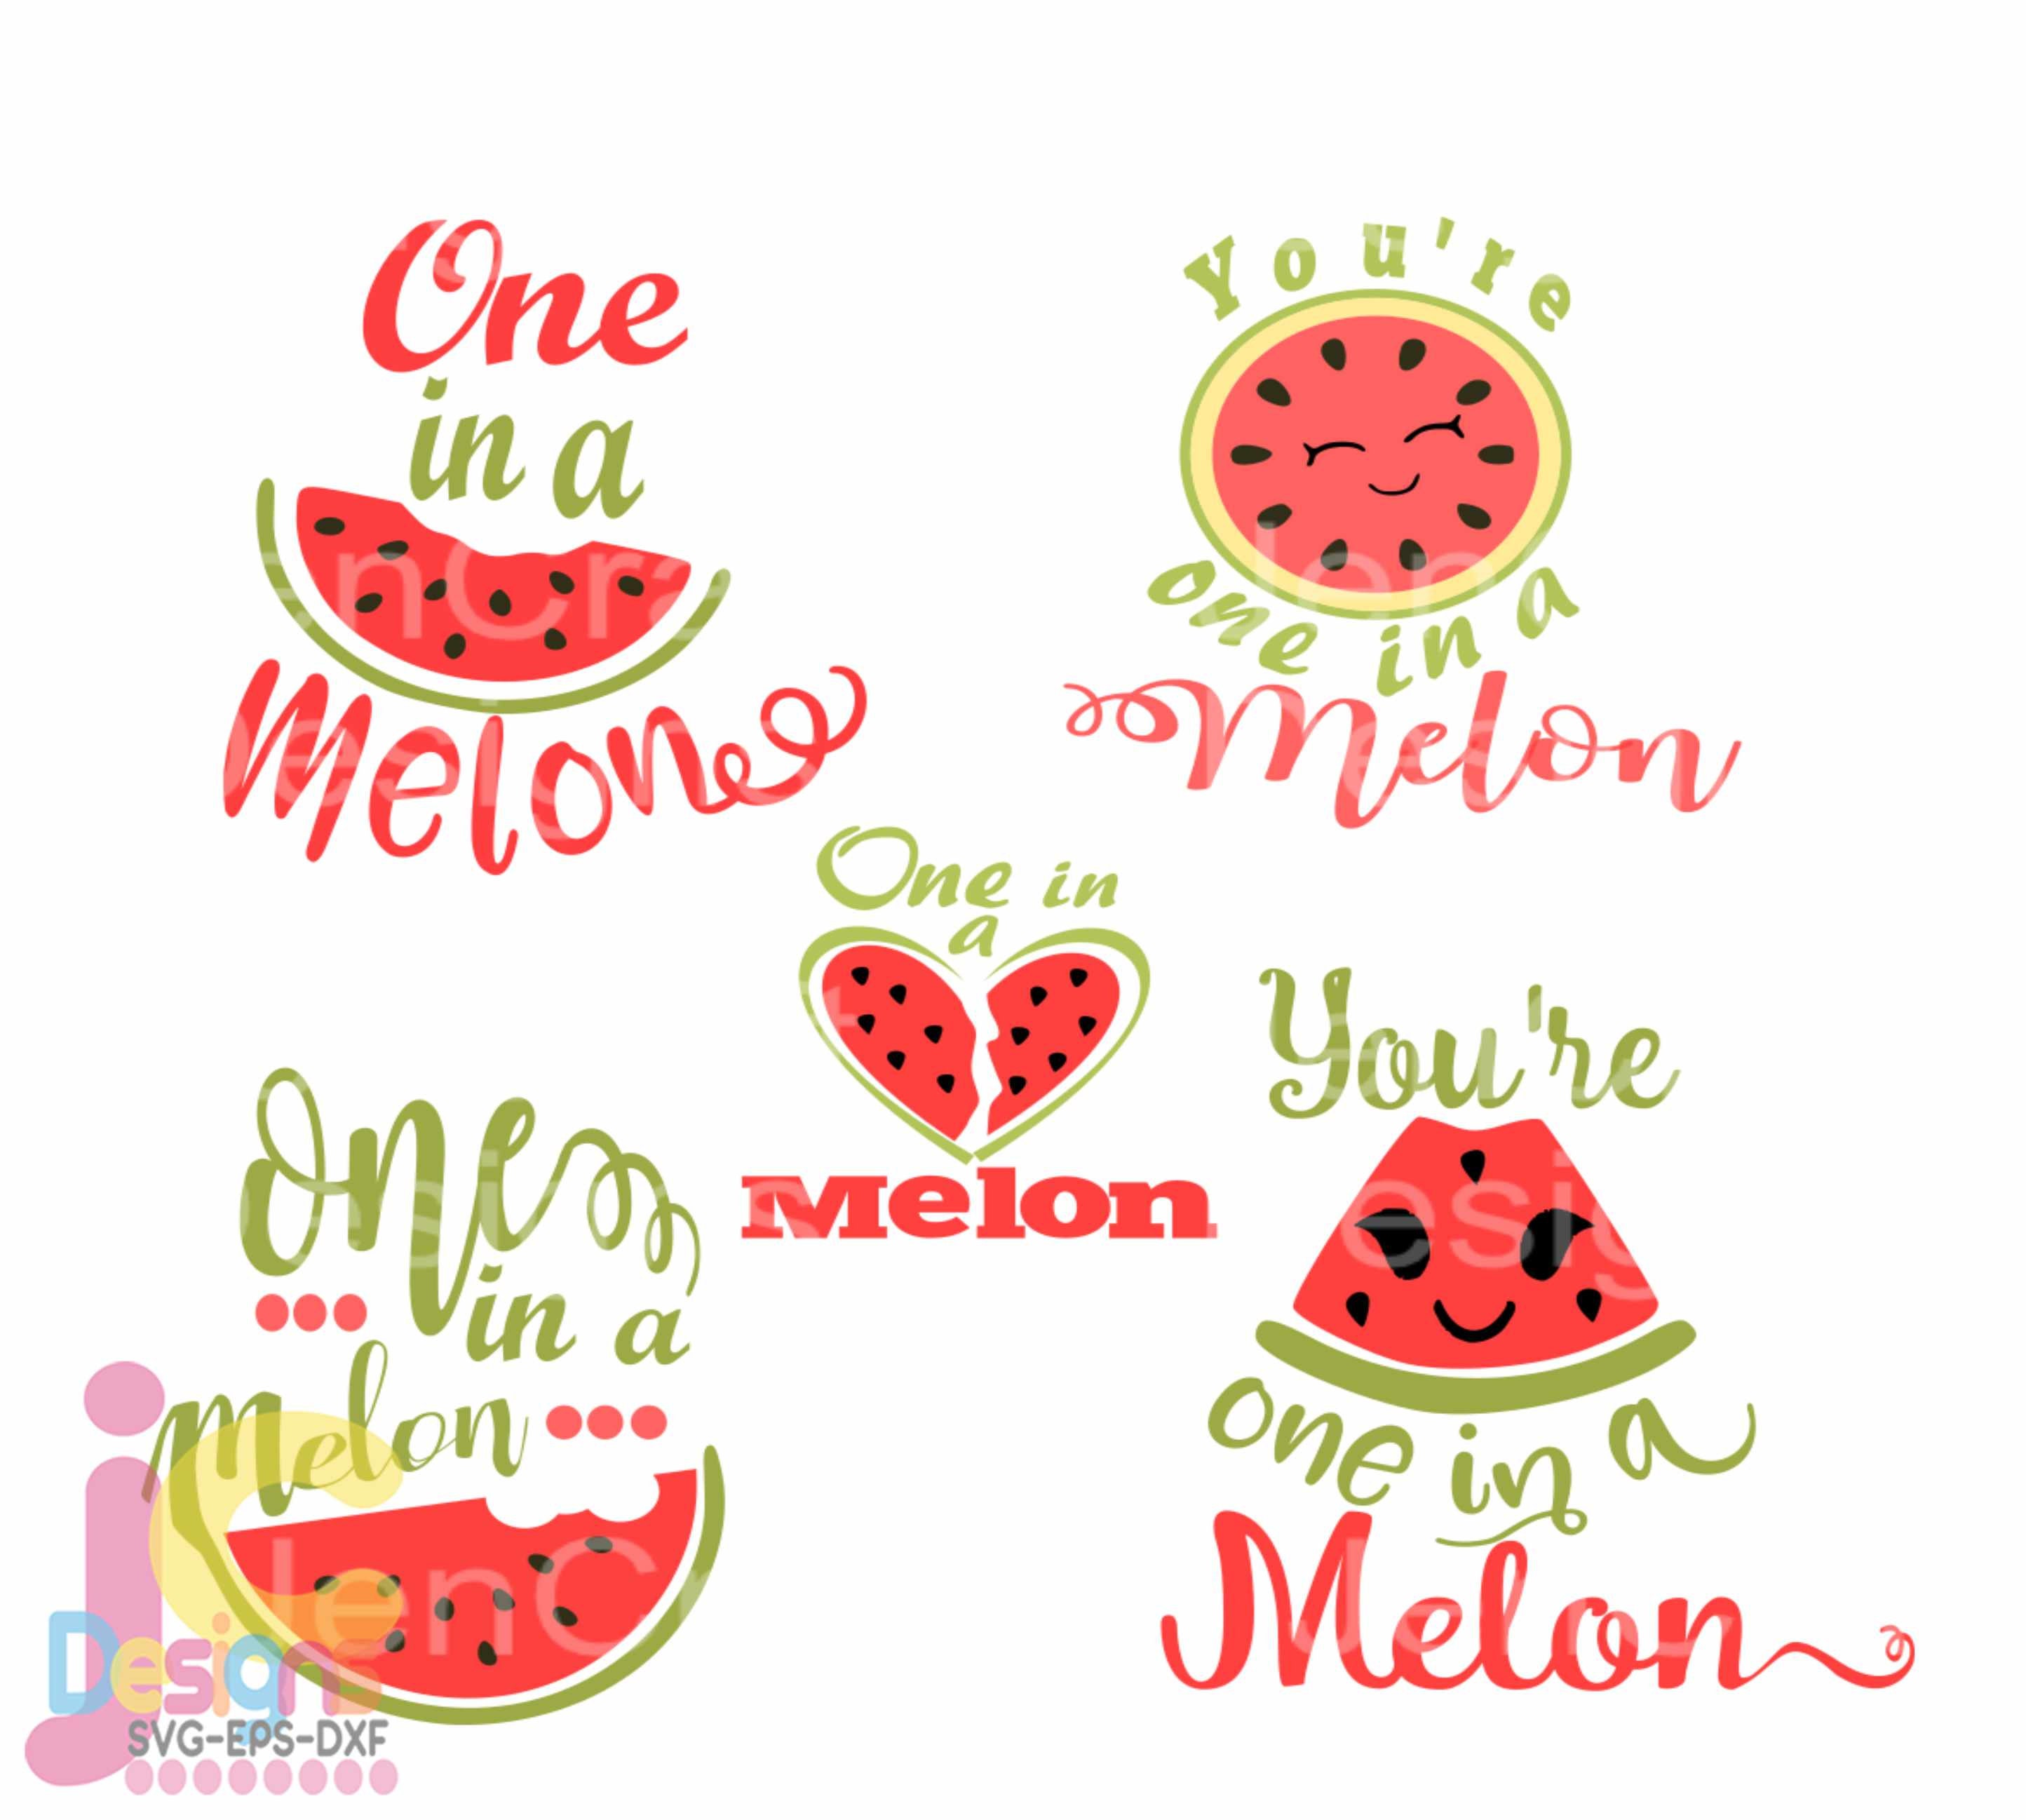 Download Summer Watermelon Svg One In A Melon Svg Summer Svg Cute Kids Print Sublimation Svg Dxf Eps Png Clipart Digitalart Cricut Silhouette